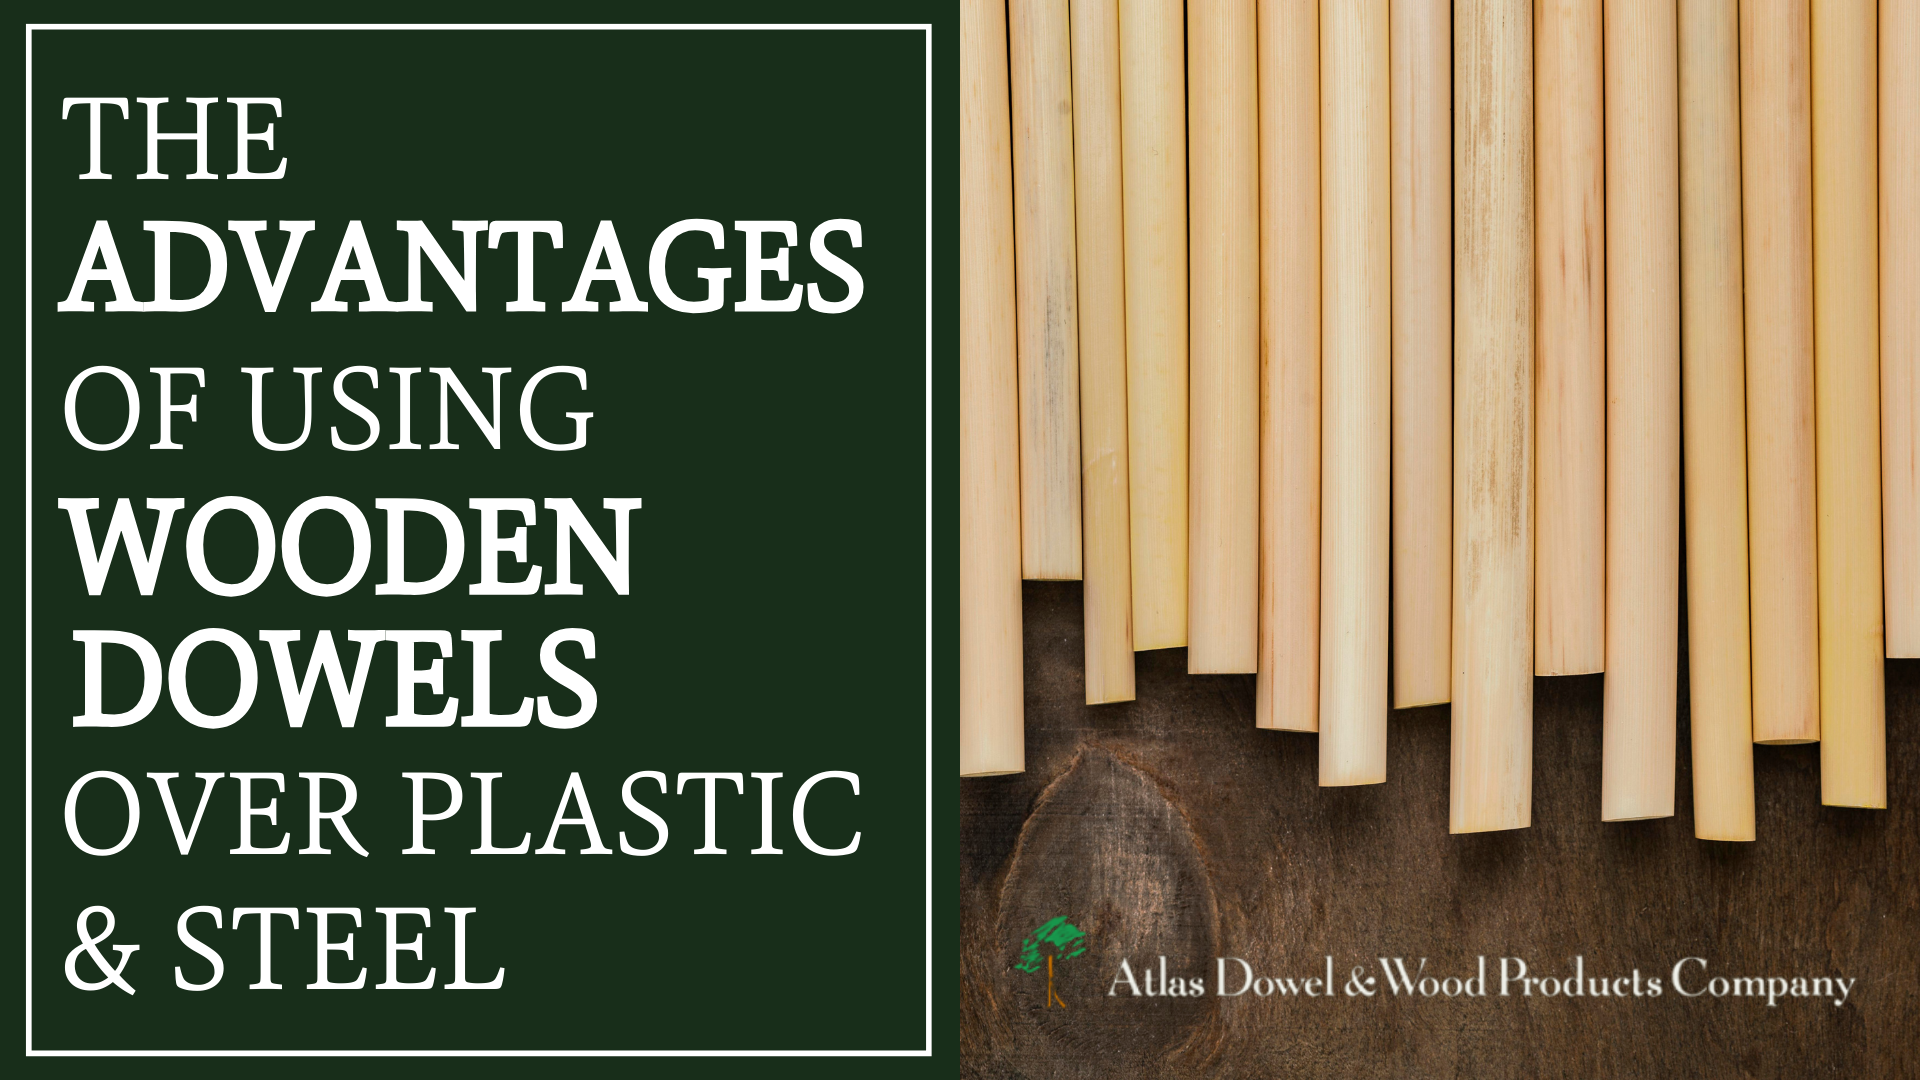 The Advantages of Using Wooden Dowels Over Plastic and Steel